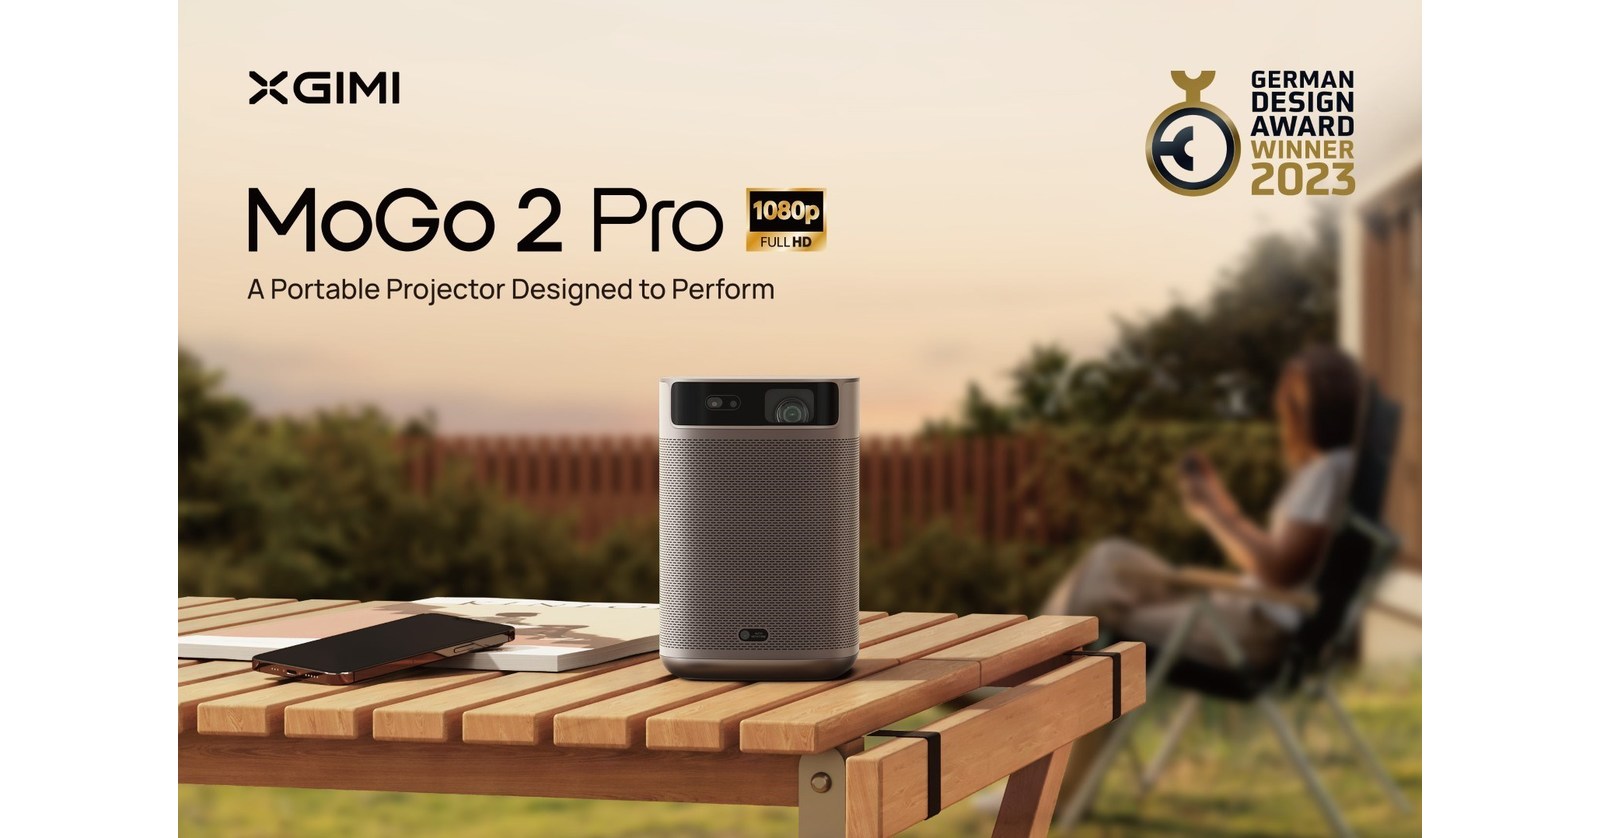 XGIMI MoGo 2 Pro: One of the Best Portable Projectors of 2023 